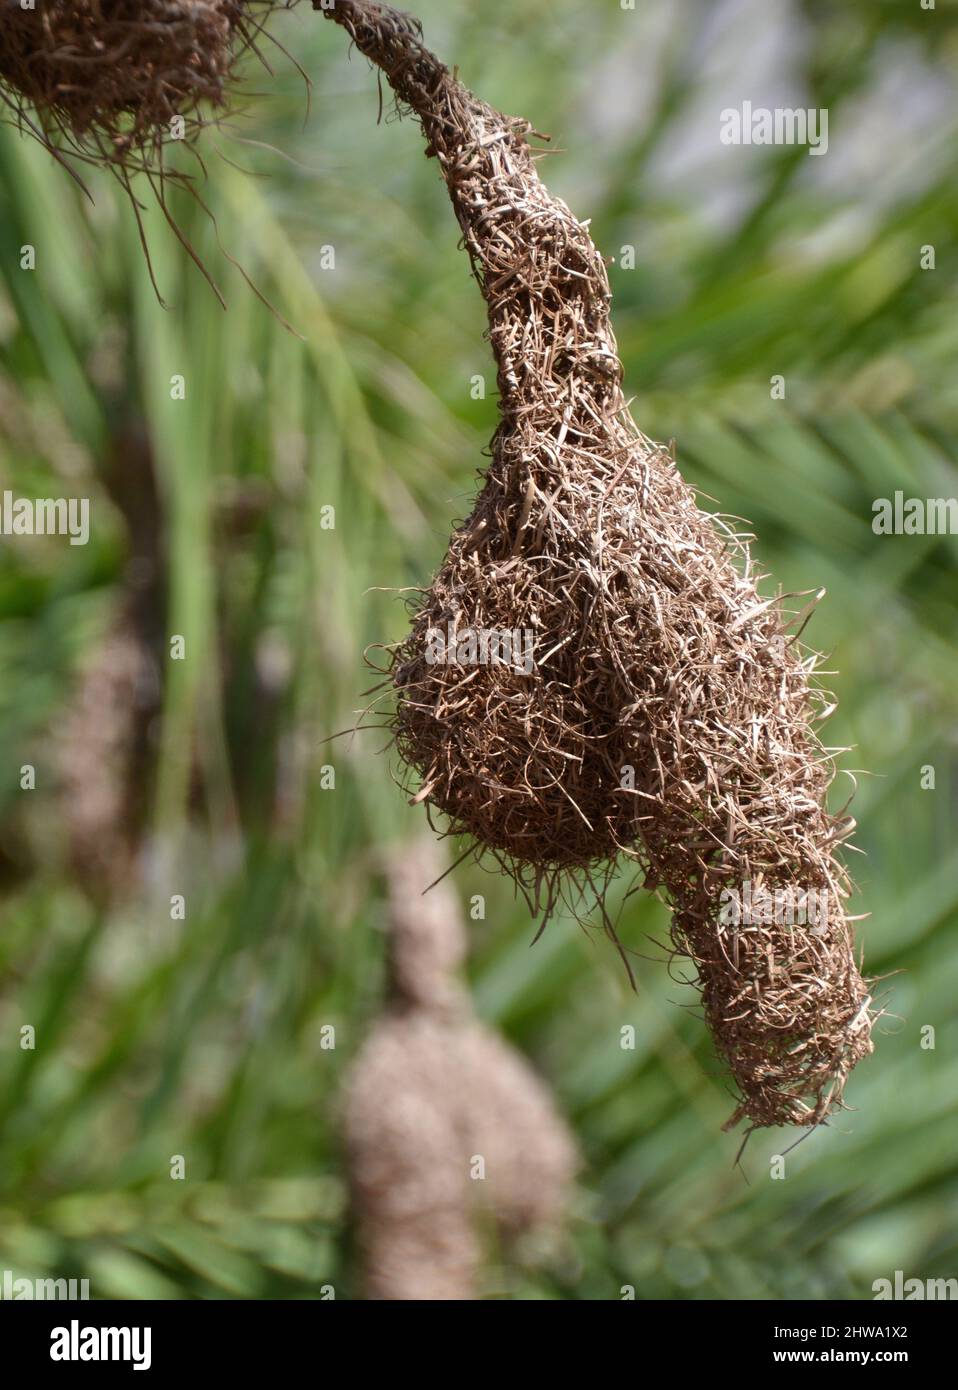 Humorous nest of the masked weaver bird in South Africa forms the shape of a penis and testicles as it hangs from a tree in South Africa's Kruger Park Stock Photo